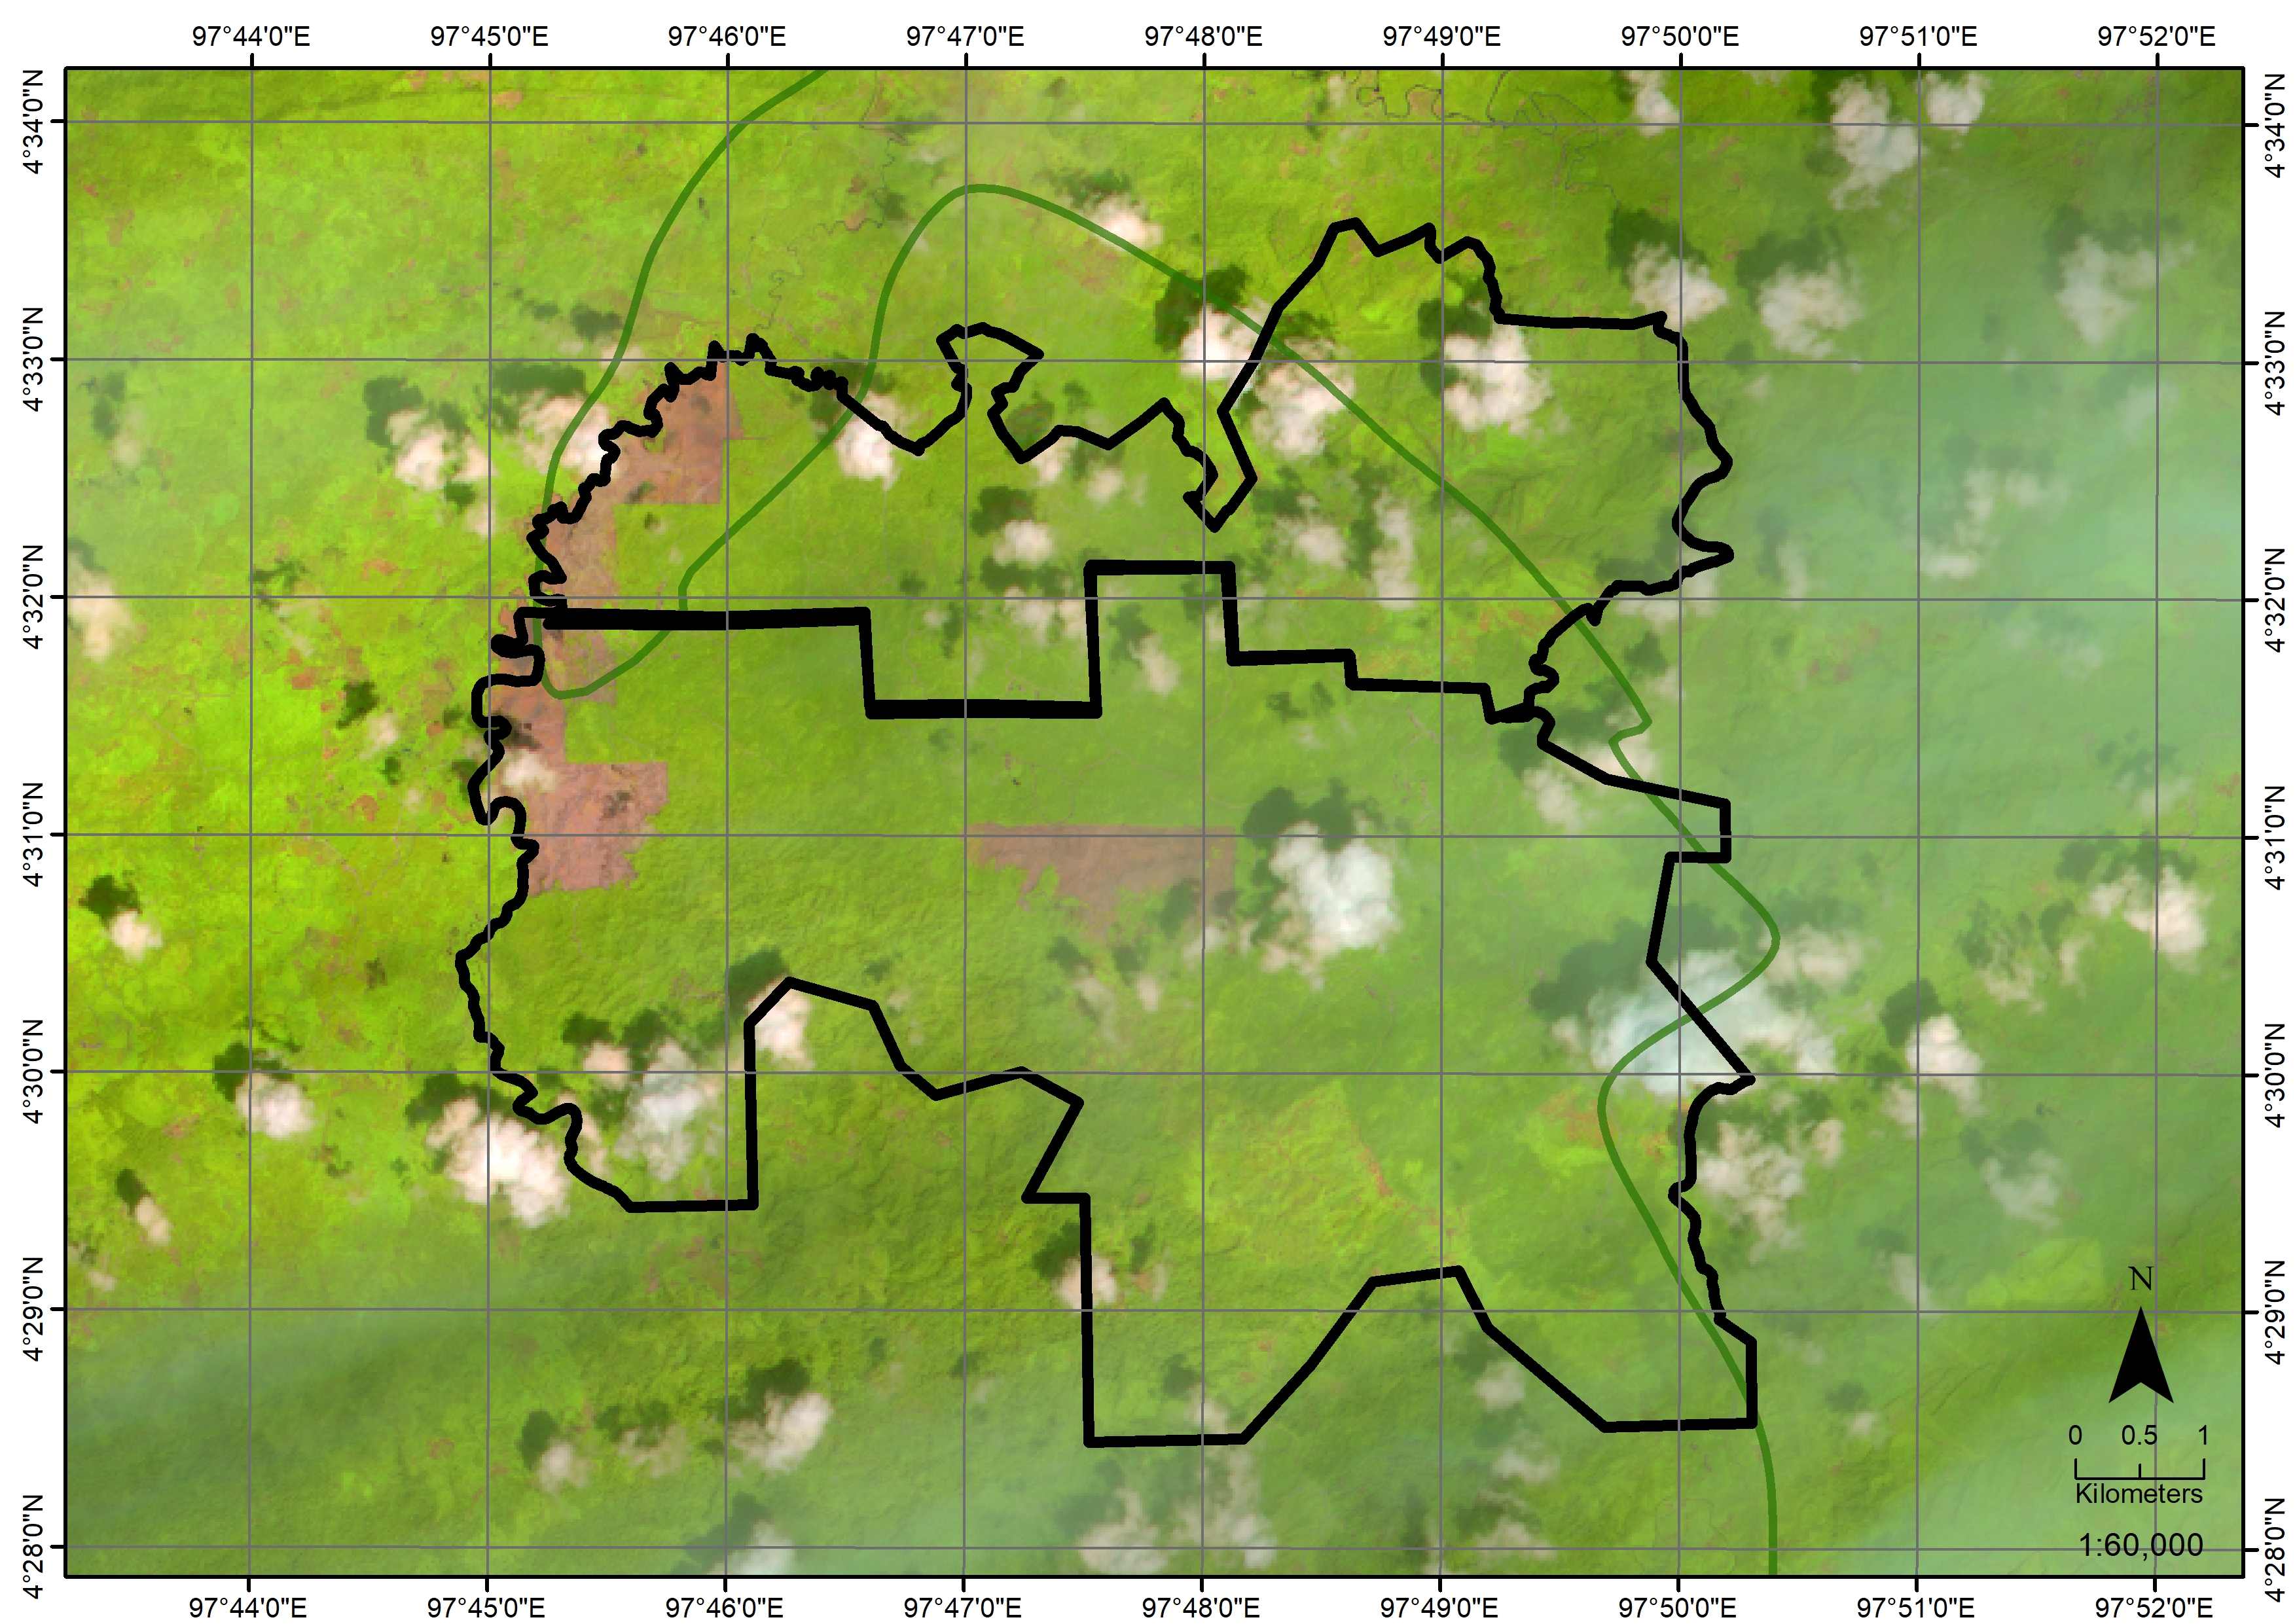 Satellite image show forest cover in PTPN I has been reduced from 405 ha in January 2018 to 386 ha at the end of October 2018 for the establishment of new oil palm plantings.